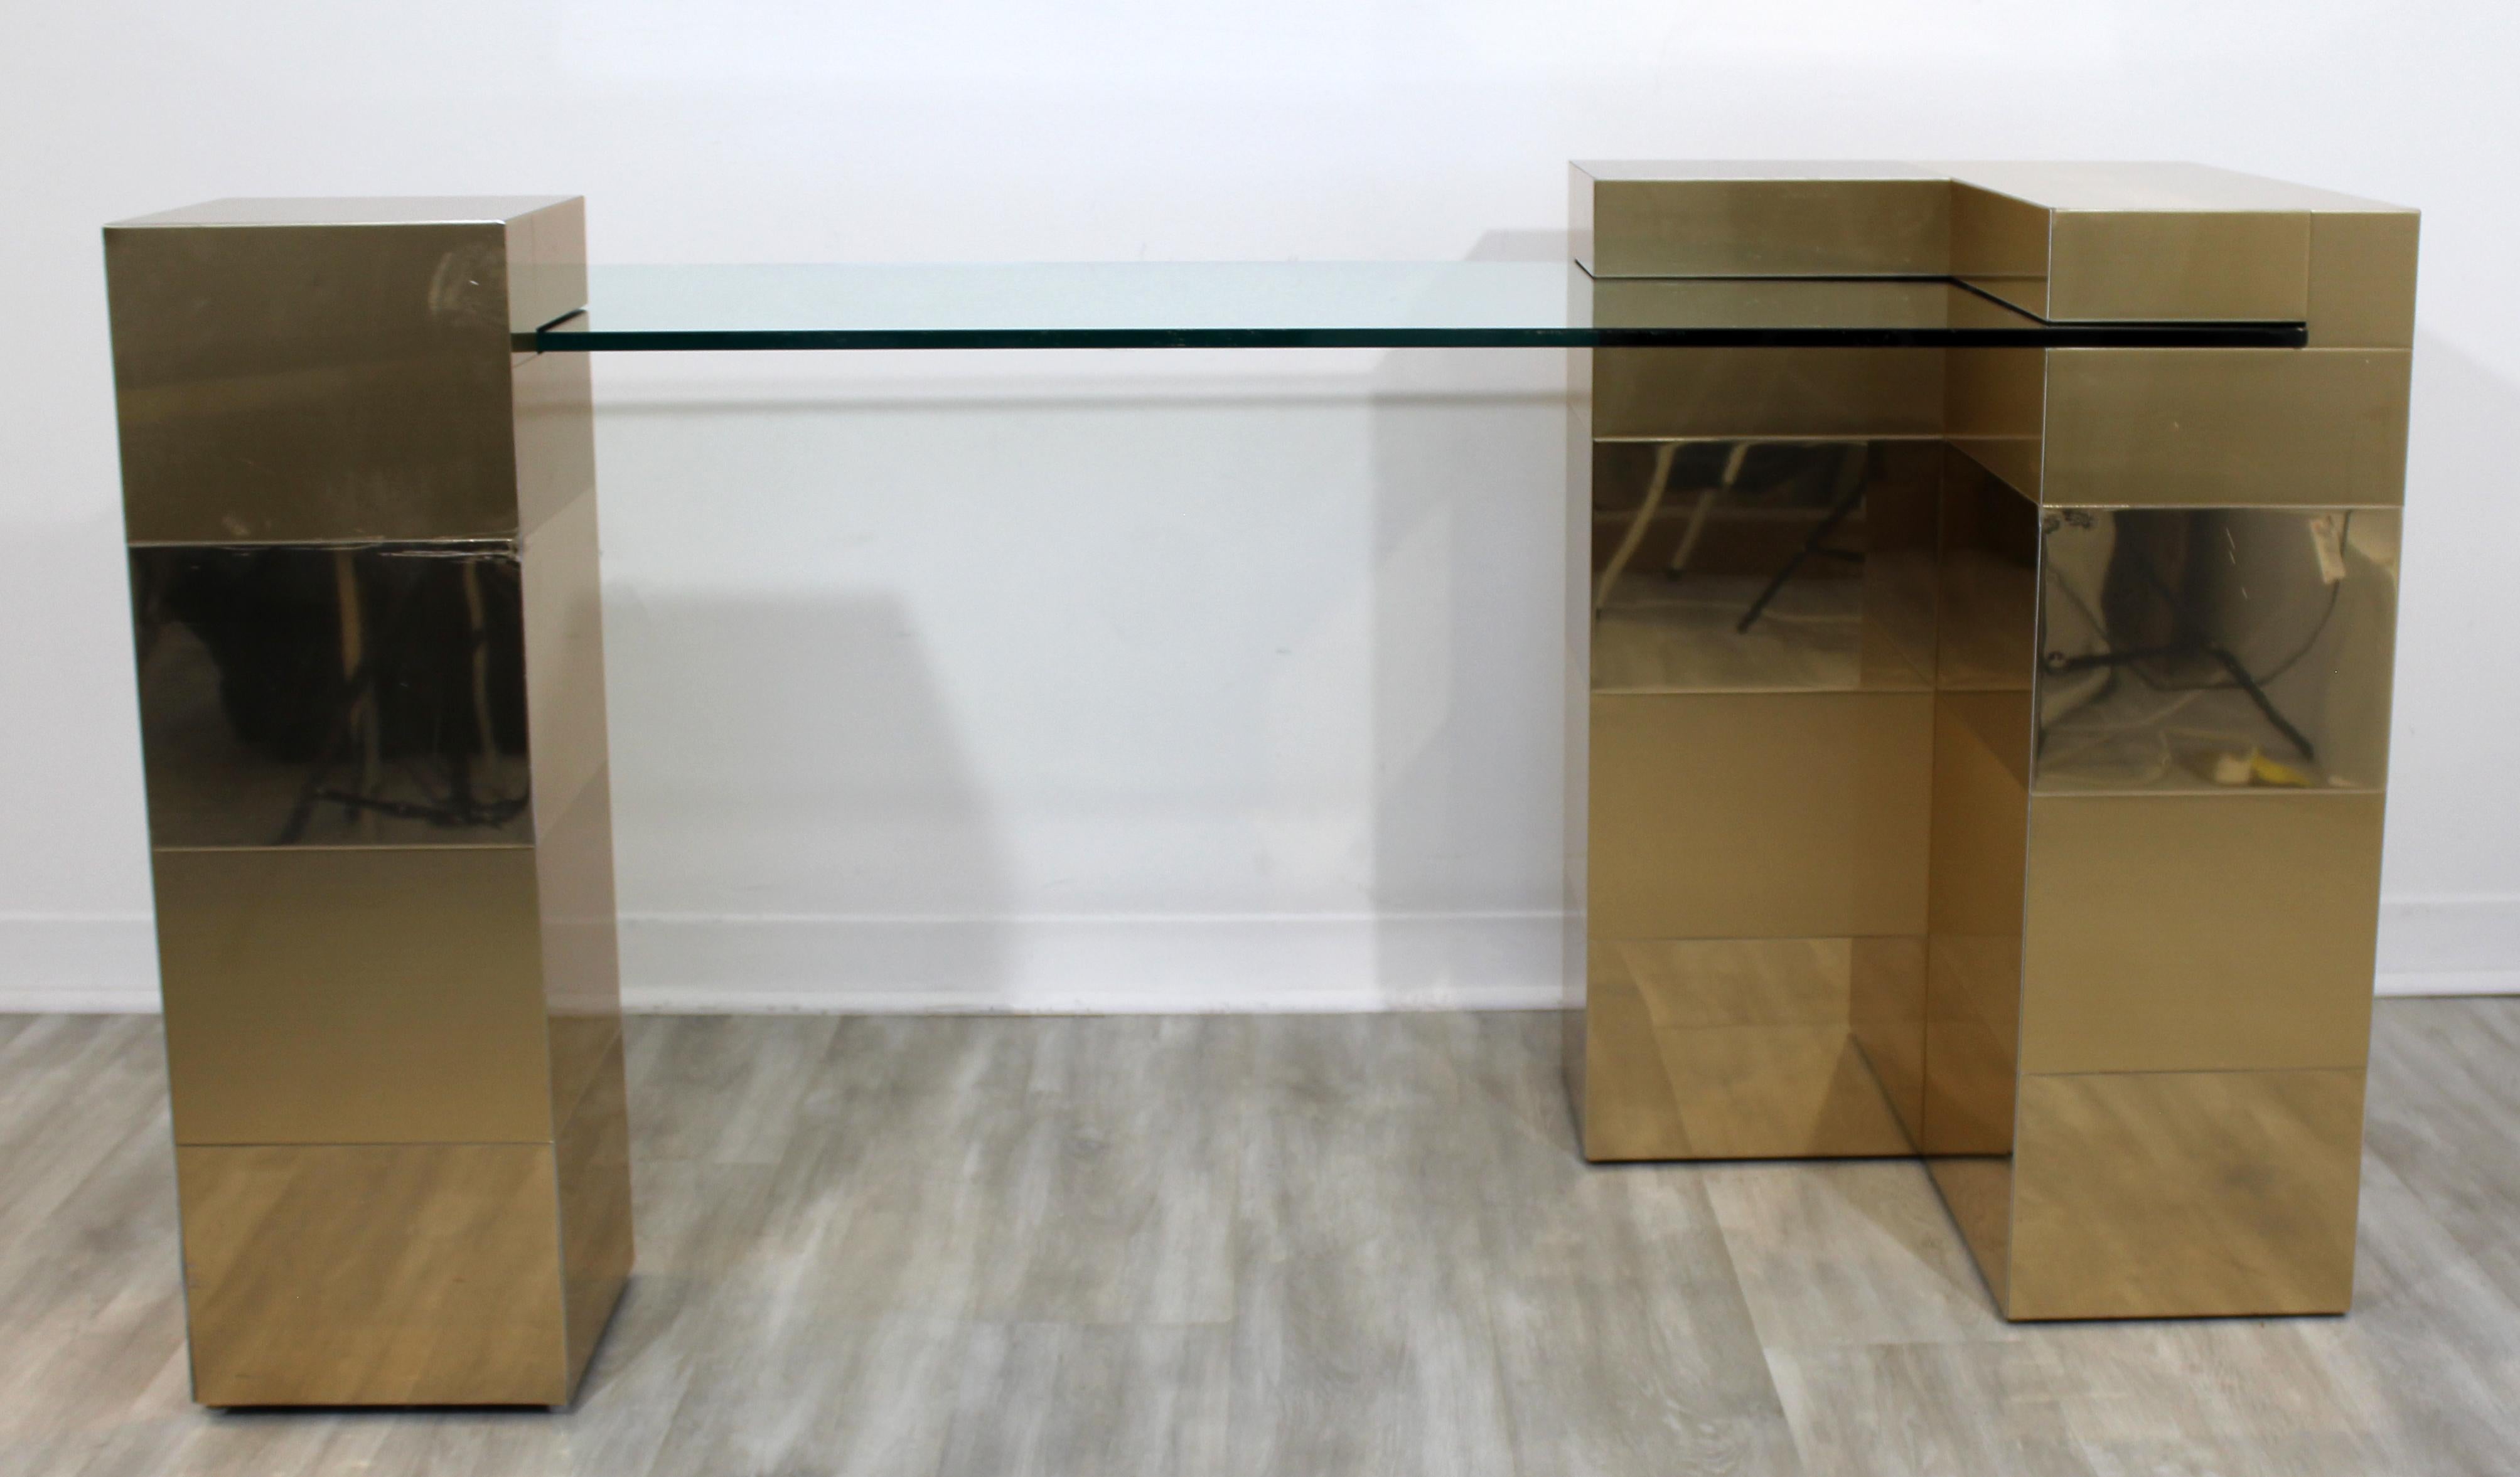 For your consideration is an incredible, brass desk, with interlocking glass top, in the style of Paul Evans' cityscape, circa 1970s. In very good vintage condition. The dimensions are 60